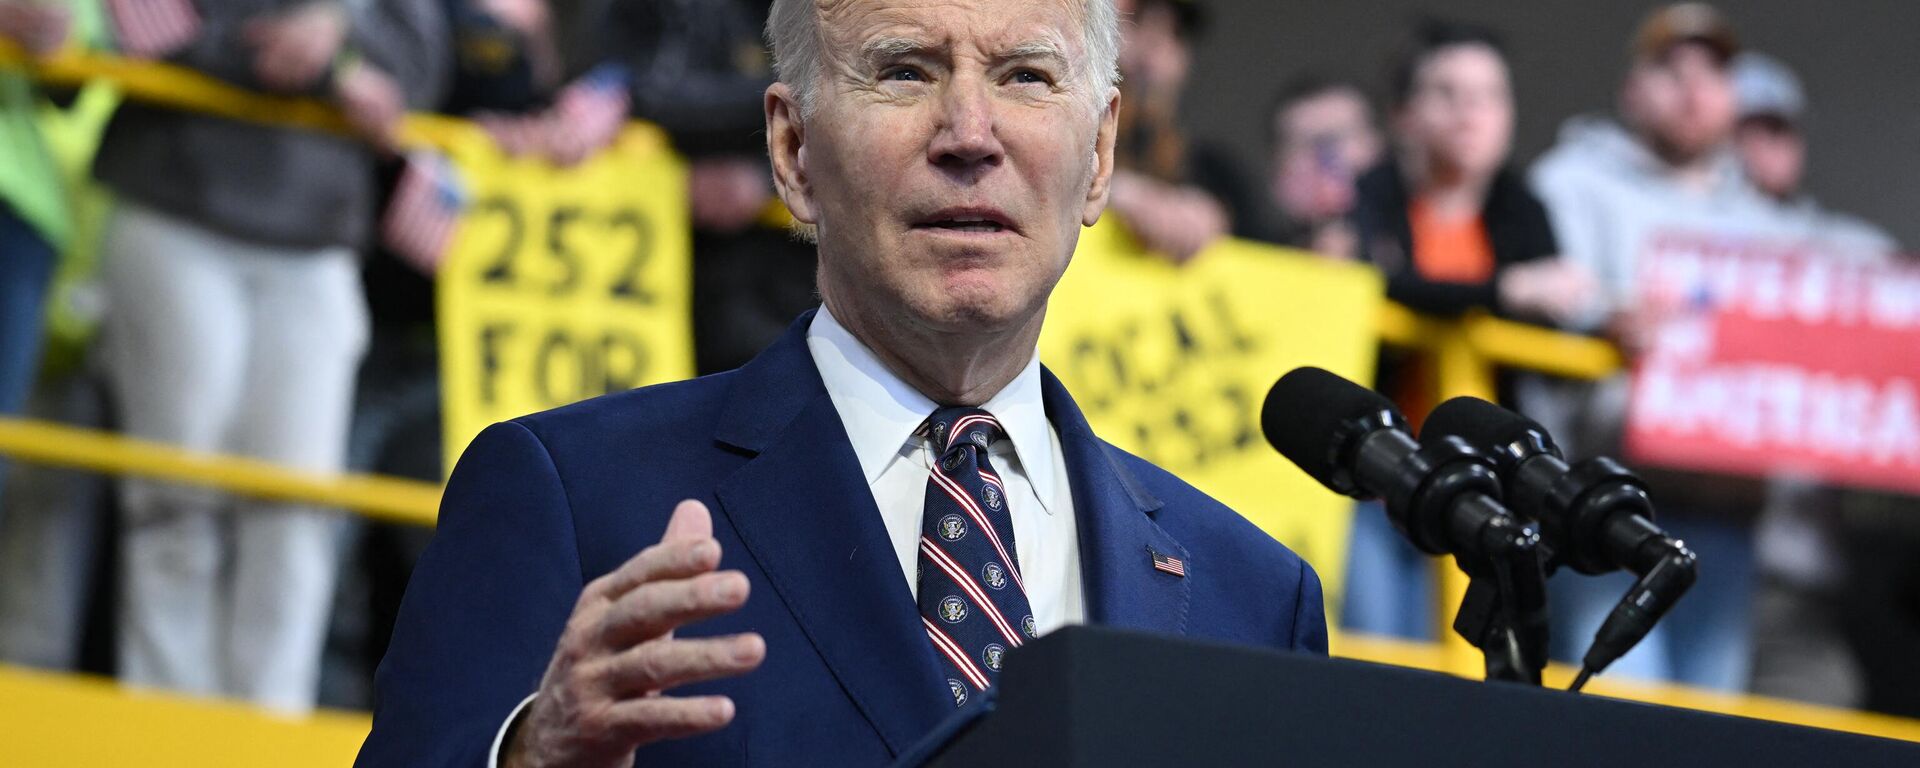 US President Joe Biden speaks about his proposed Federal budget for the fiscal year 2024 at the Finishing Trades Institute in Philadelphia, Pennsylvania, on March 9, 2023 - Sputnik India, 1920, 28.03.2023